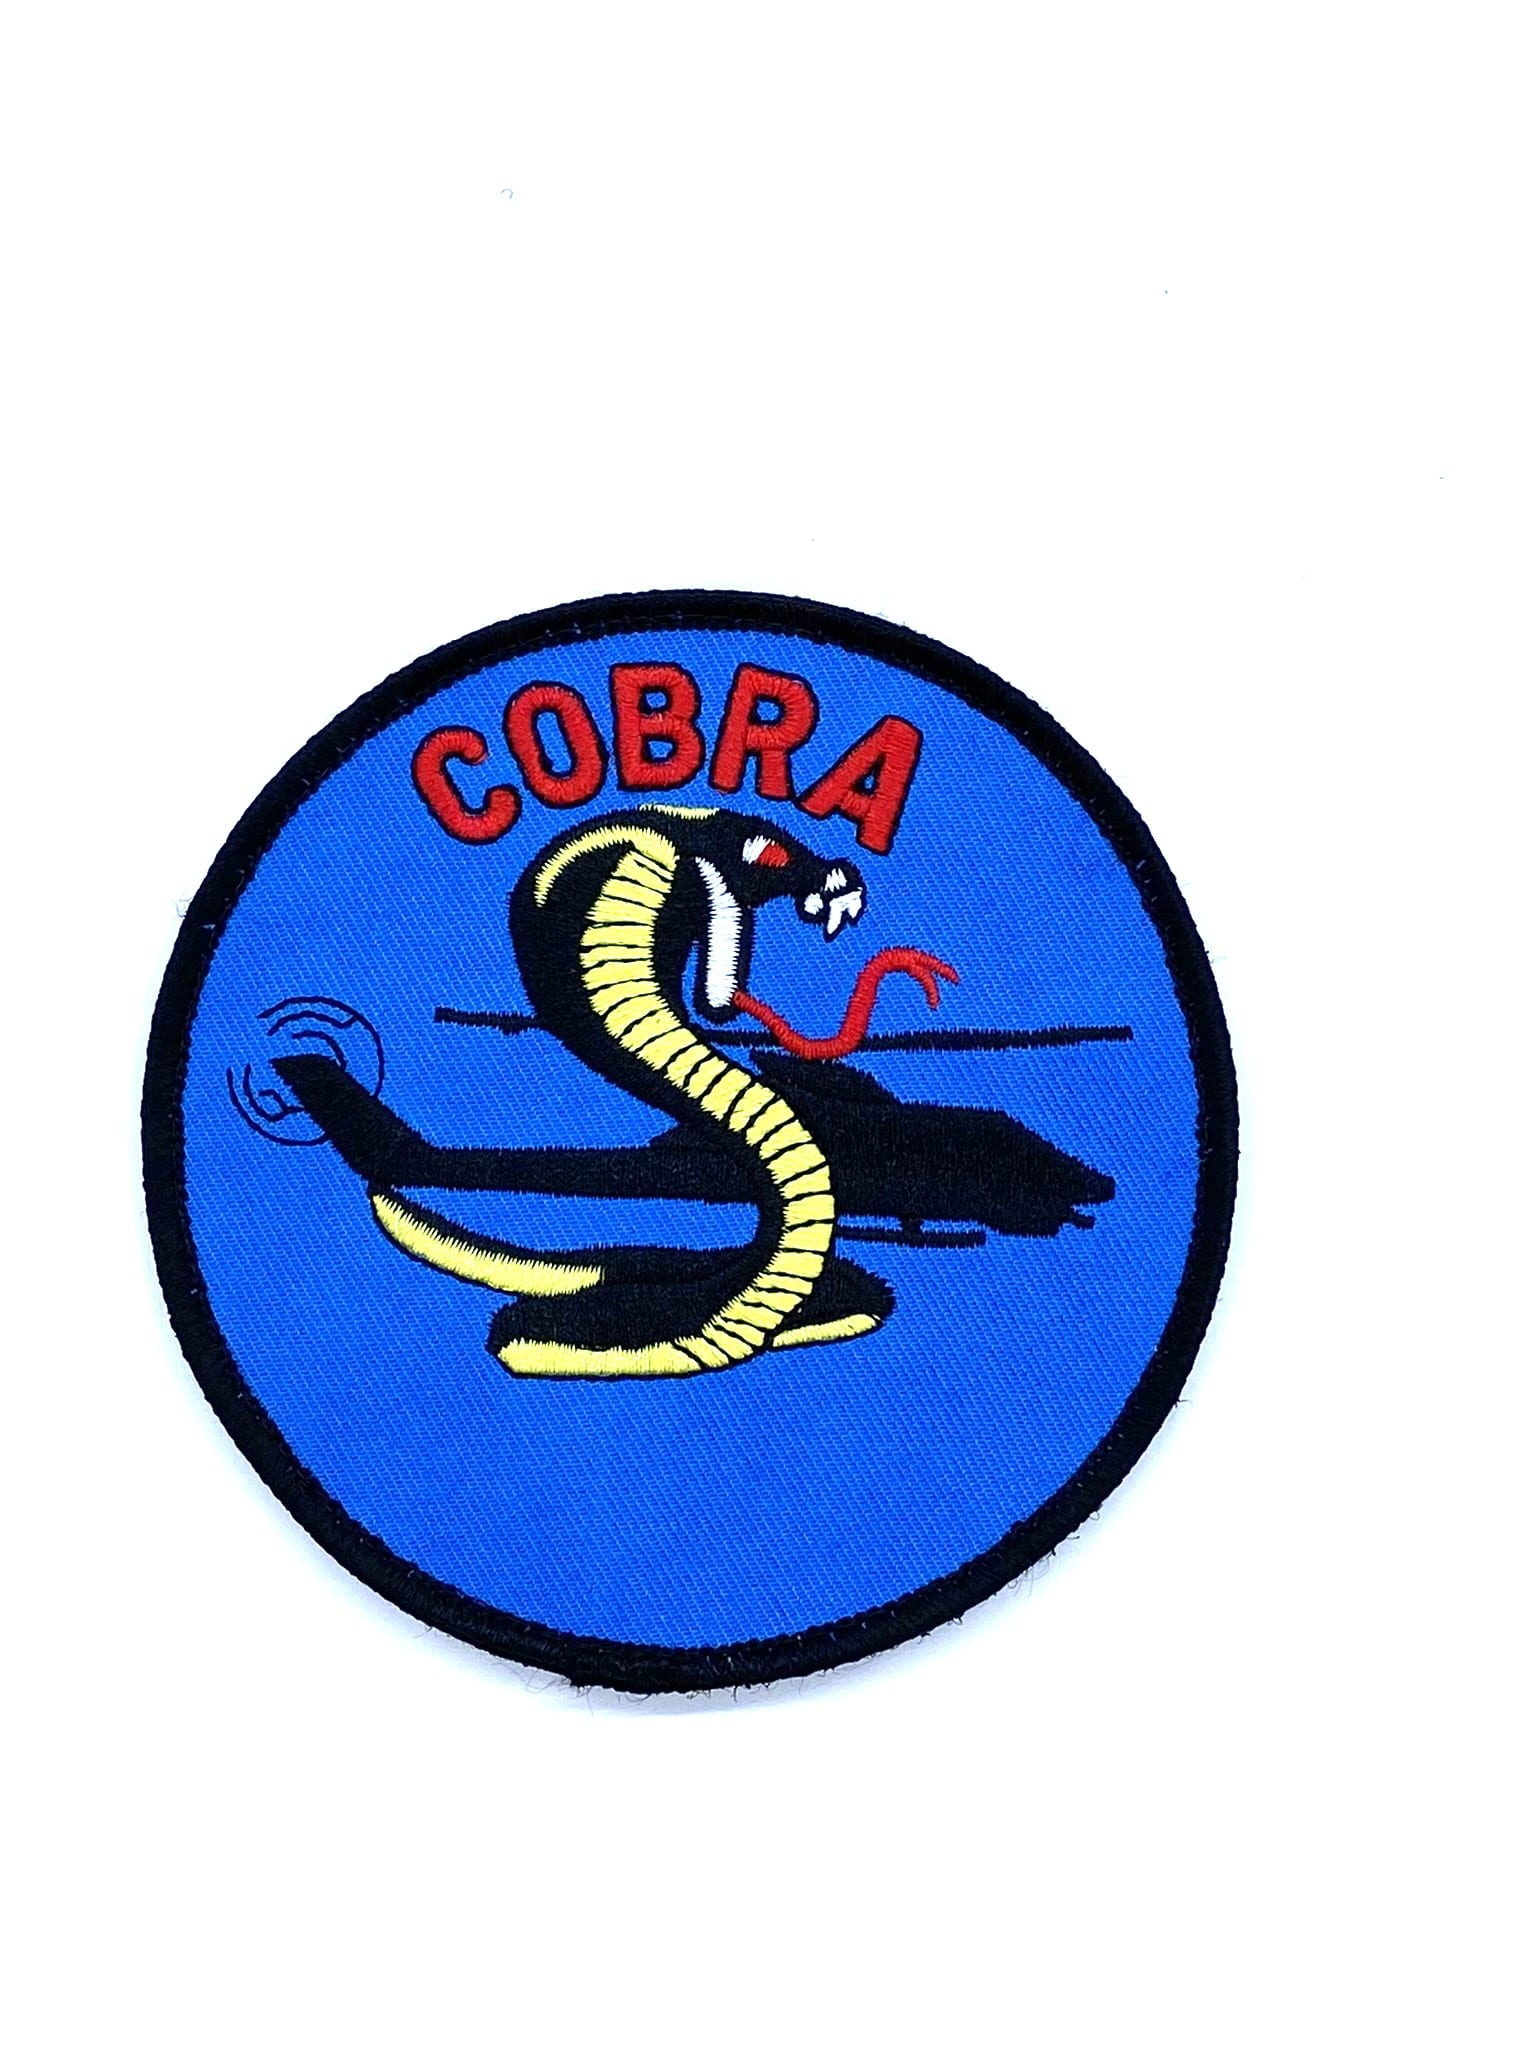 US Army AH-1 Cobra Patch – With Hook and Loop